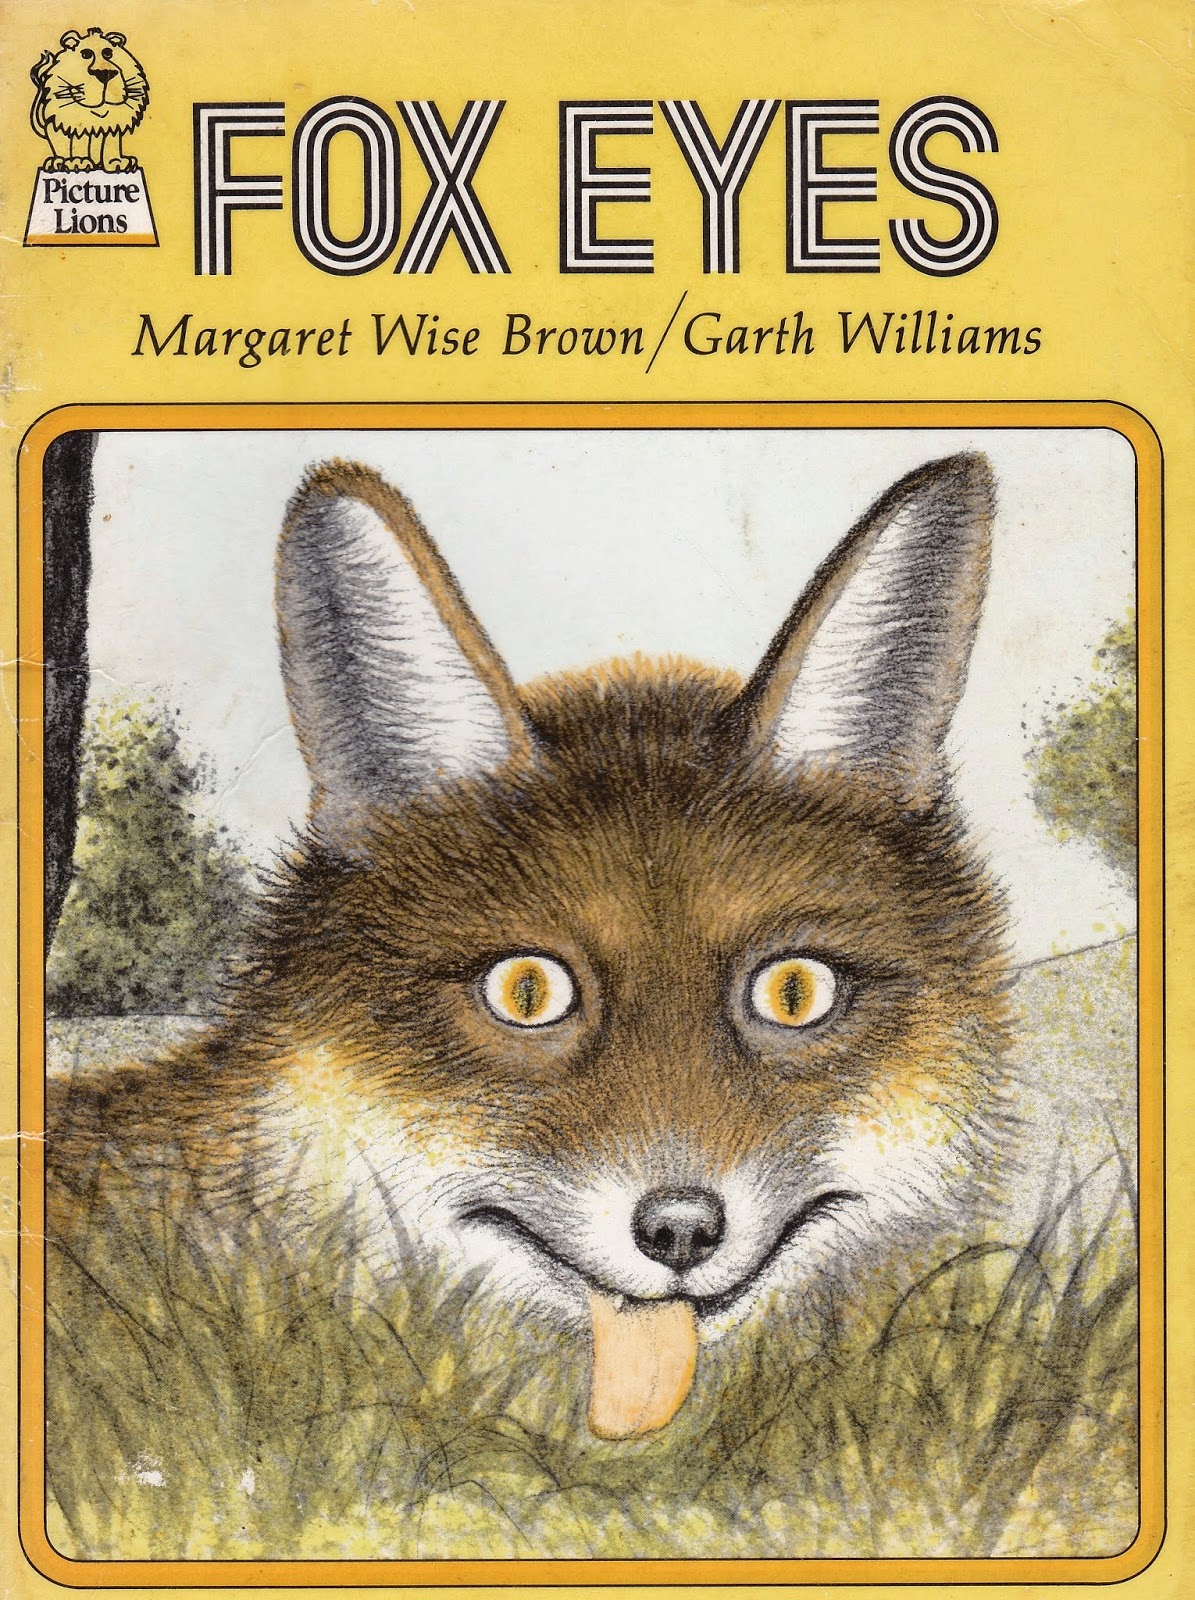 Little Library of Rescued Books: Fox Eyes by Margaret Wise Brown and ...